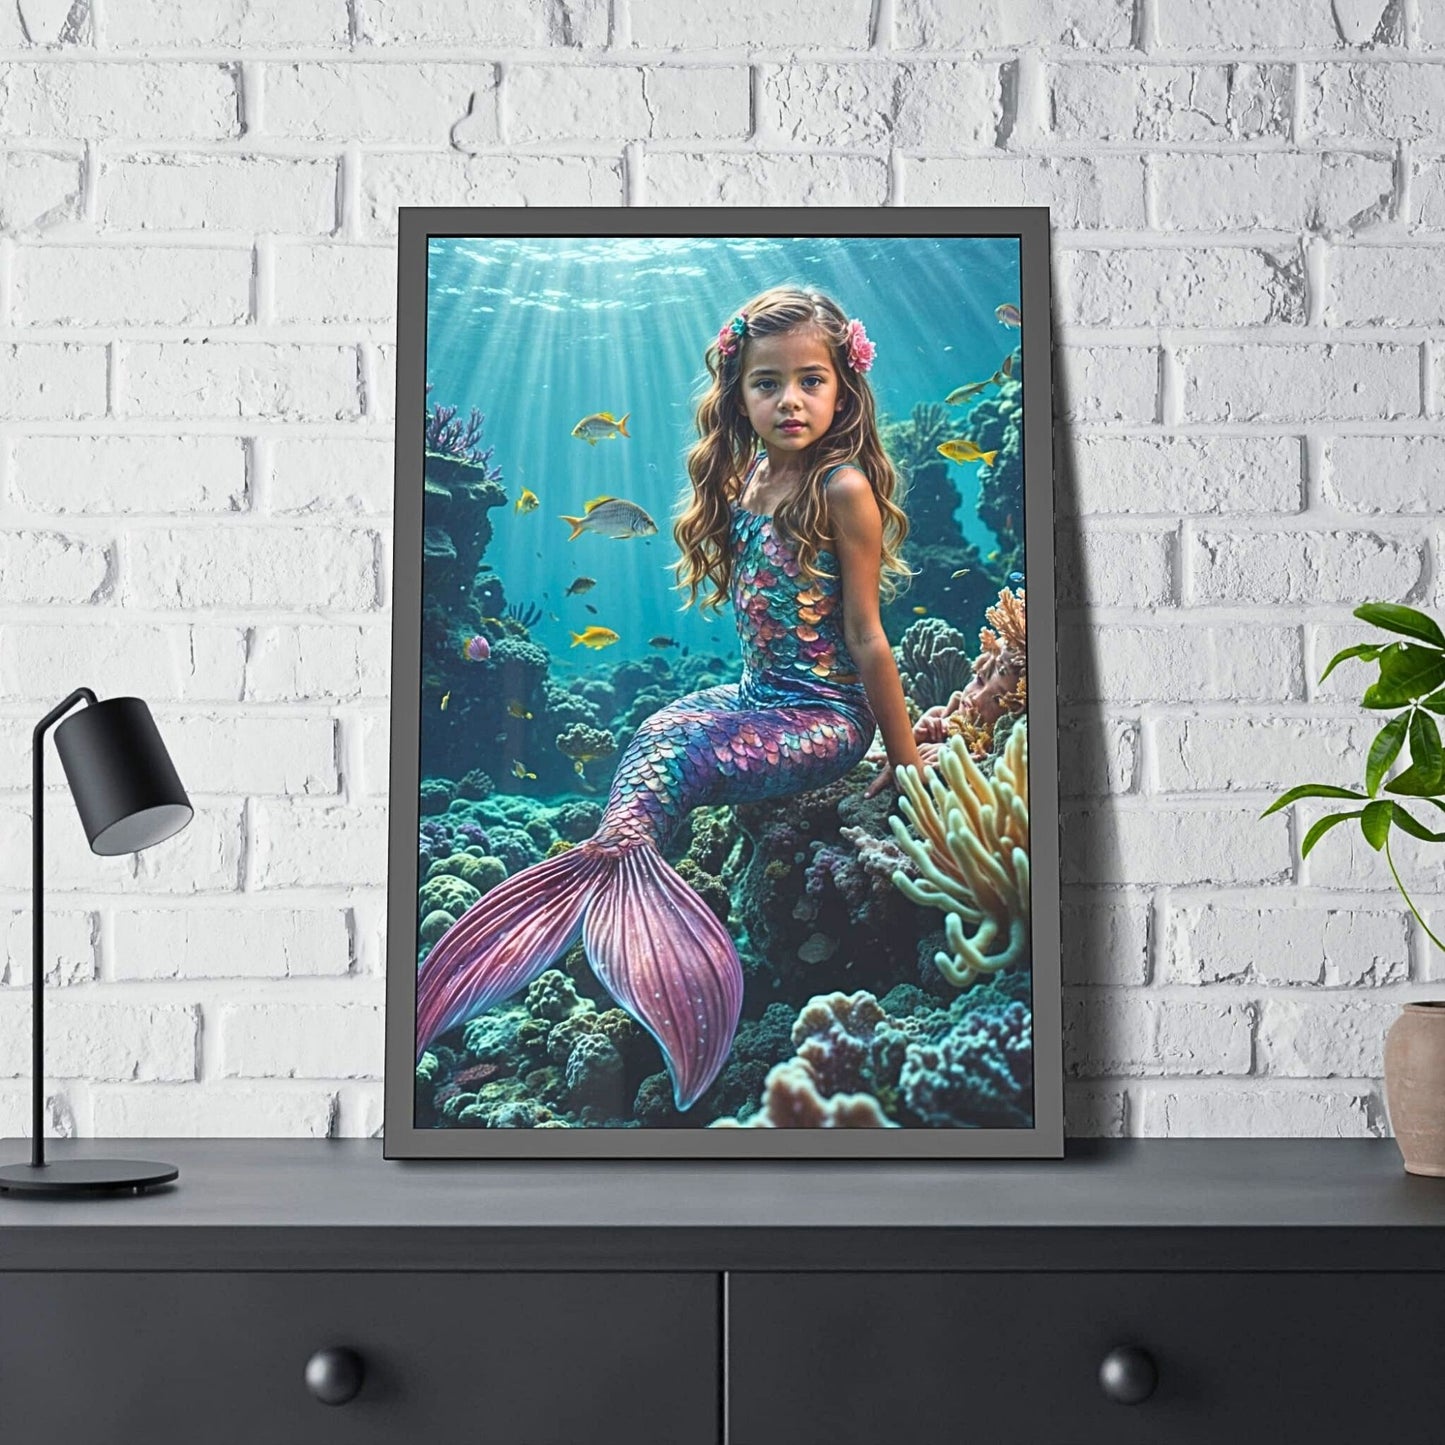 Create a stunning Custom Mermaid Portrait from Photo. Personalized Princess Mermaid Portrait for your daughter's Birthday. Transform any photo into Wall Art. Custom Mermaid Gifts for girls. Unique Princess Birthday Gift. Personalized Photo Portrait to cherish forever. Ideal for sister, mom, or girlfriend.